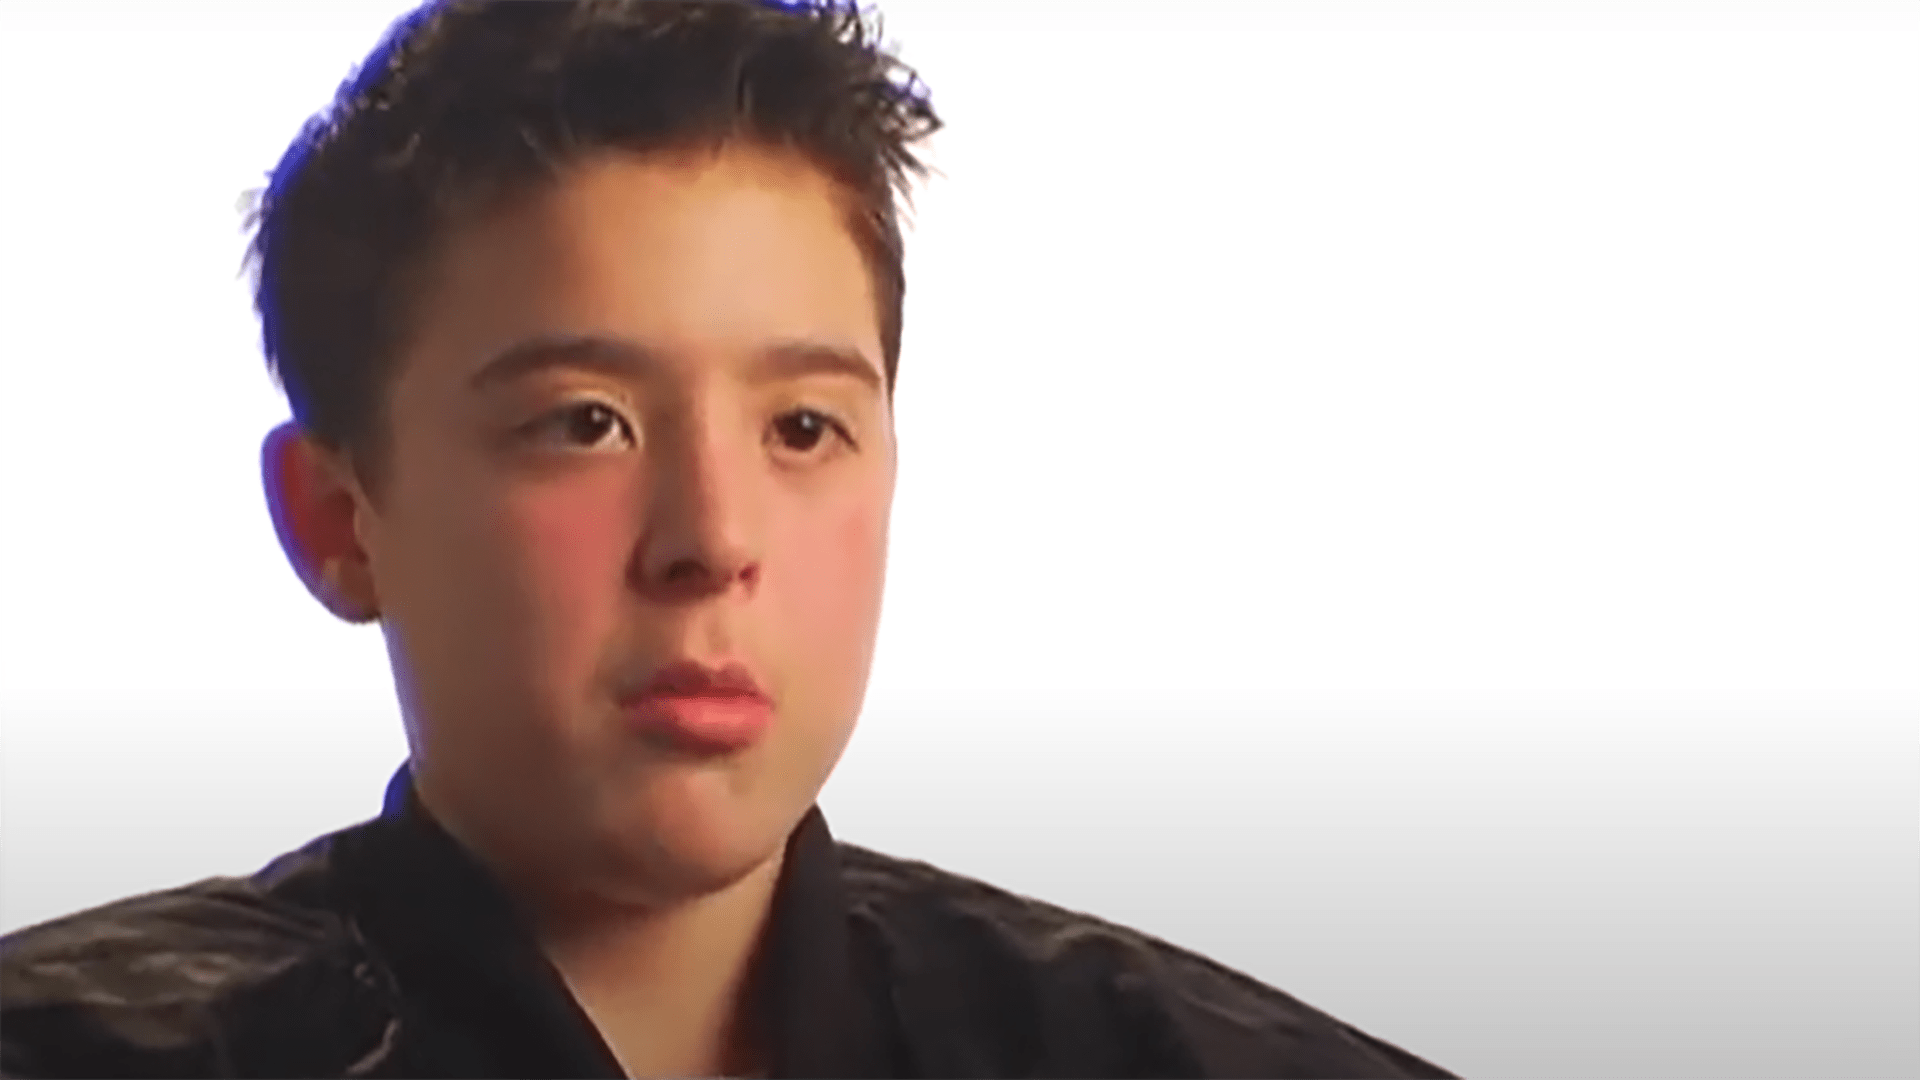 A young boy wearing a black shirt is interviewed against a white background